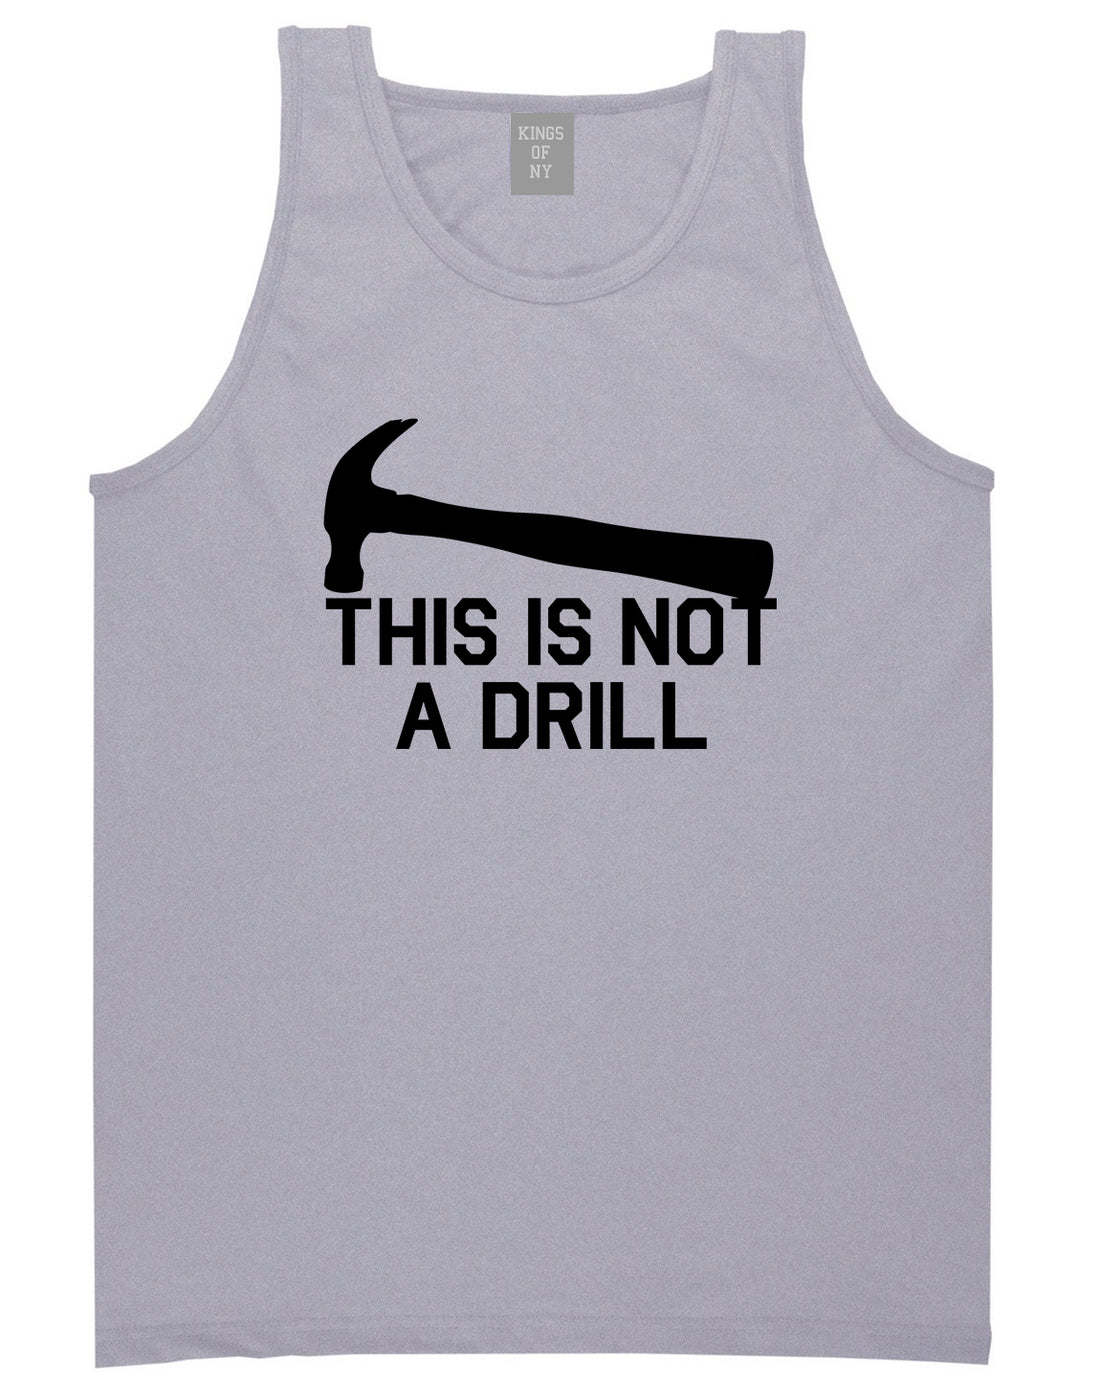 This Is Not A Drill Funny Construction Worker Mens Tank Top T-Shirt Grey